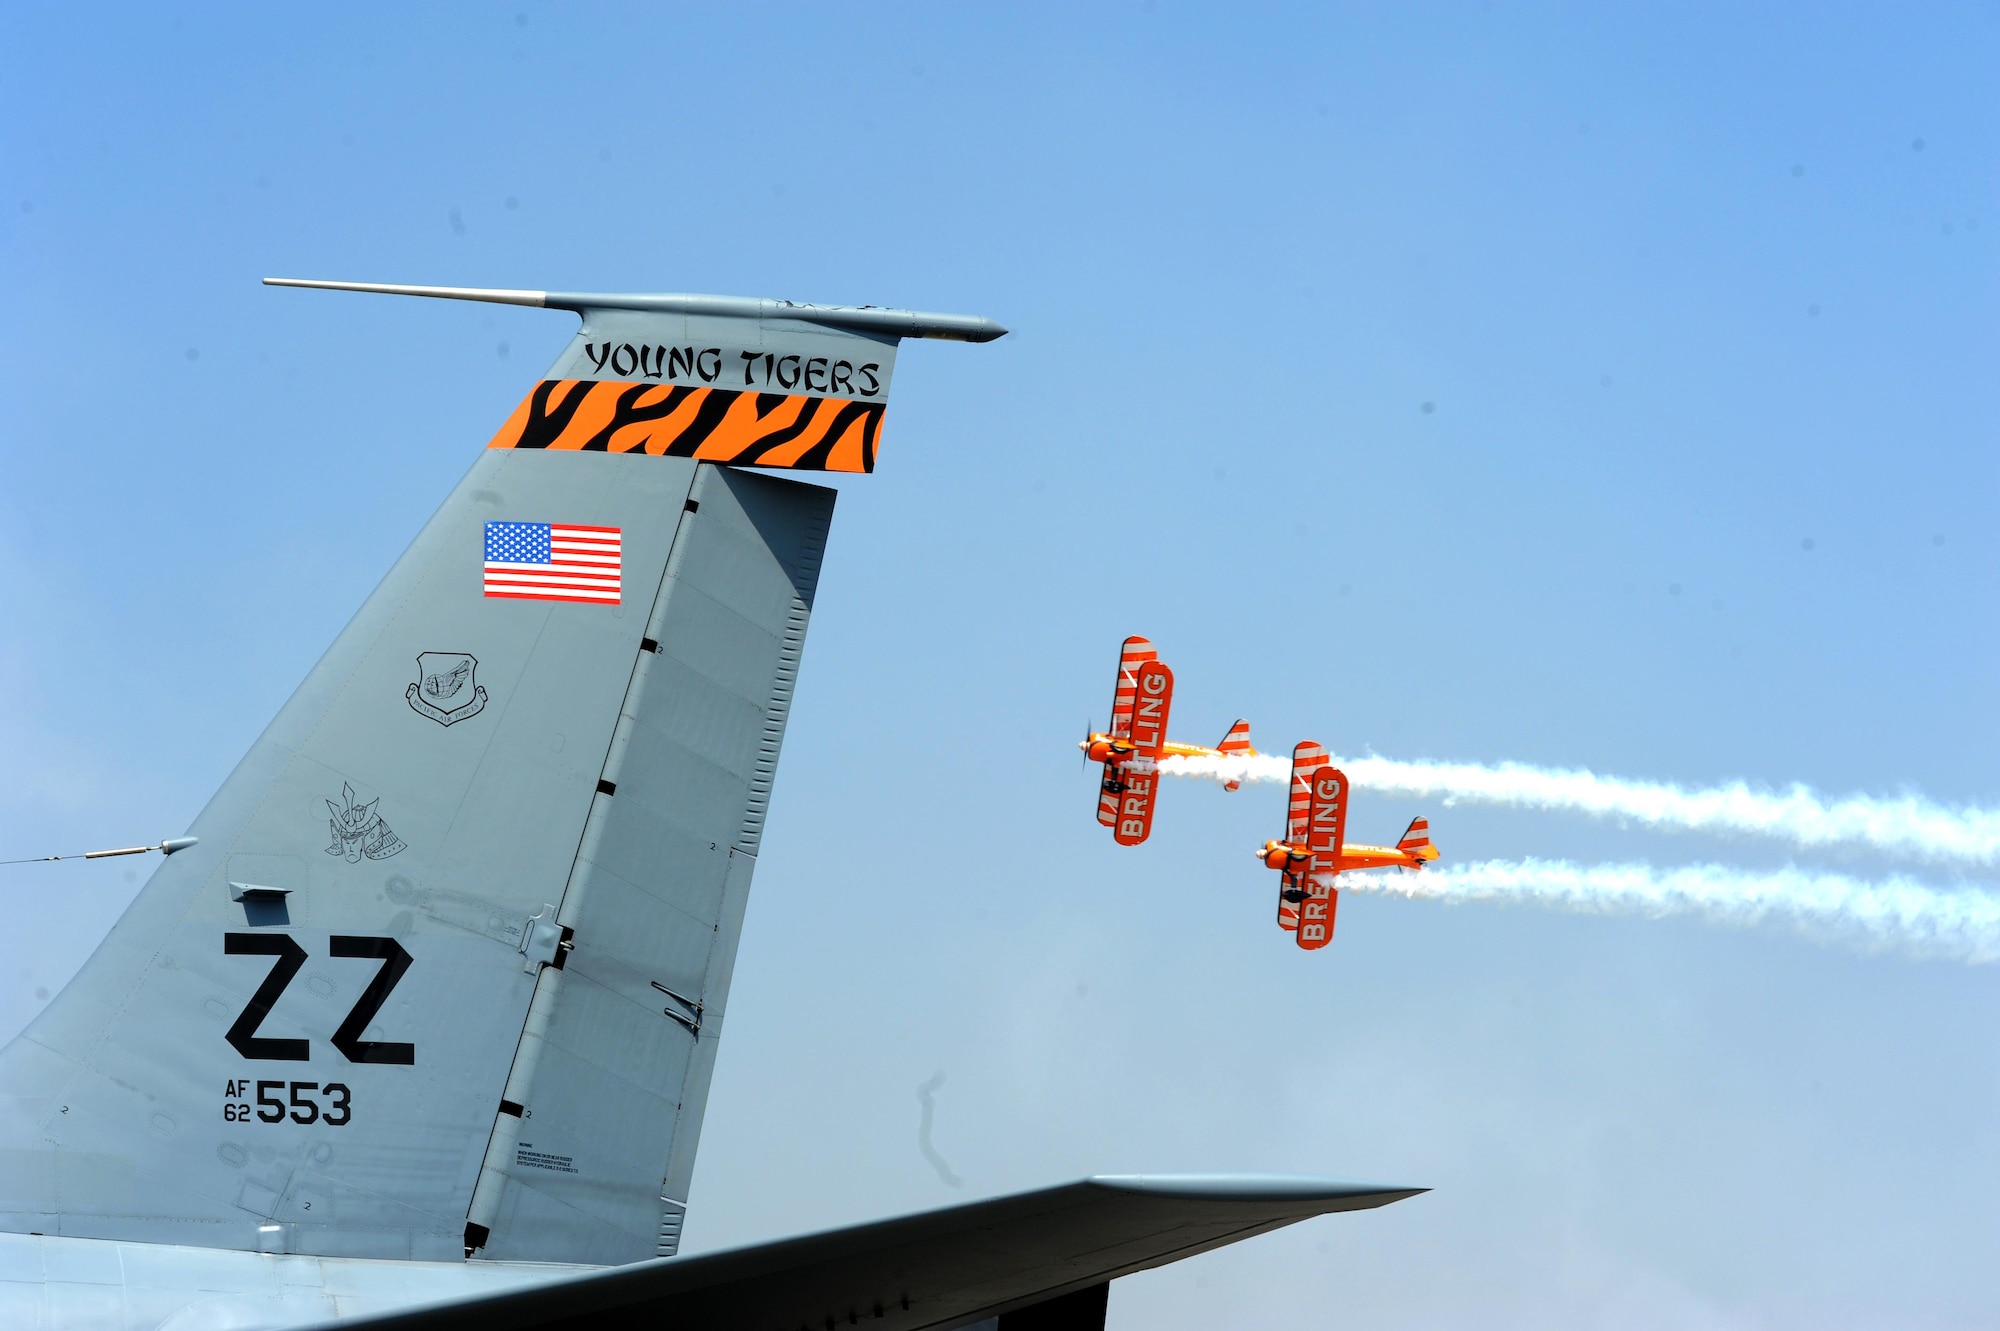 The U.K. stunt team, Breitling Wingwalkers, fly over a KC-135 Stratotanker during Aero India15, Feb. 19, 2015, at Air Force Station Yelahanka in Bengaluru, India. The KC-135 is from the 909th Air Refueling Squadron at Kadena Air Base, Japan. Aero India is India's premier aerospace exhibition and airshow and allowed the U.S. to demonstrate its commitment to the security of the Indo-Asia-Pacific region and showcase defense aircraft and equipment, which ultimately contributes toward better regional cooperation and tactical compatibility with other countries. This year marks the 10th iteration of Aero India since its inception in 1996. (U.S. Air Force photo/Airman 1st Class Stephen G.Eigel)